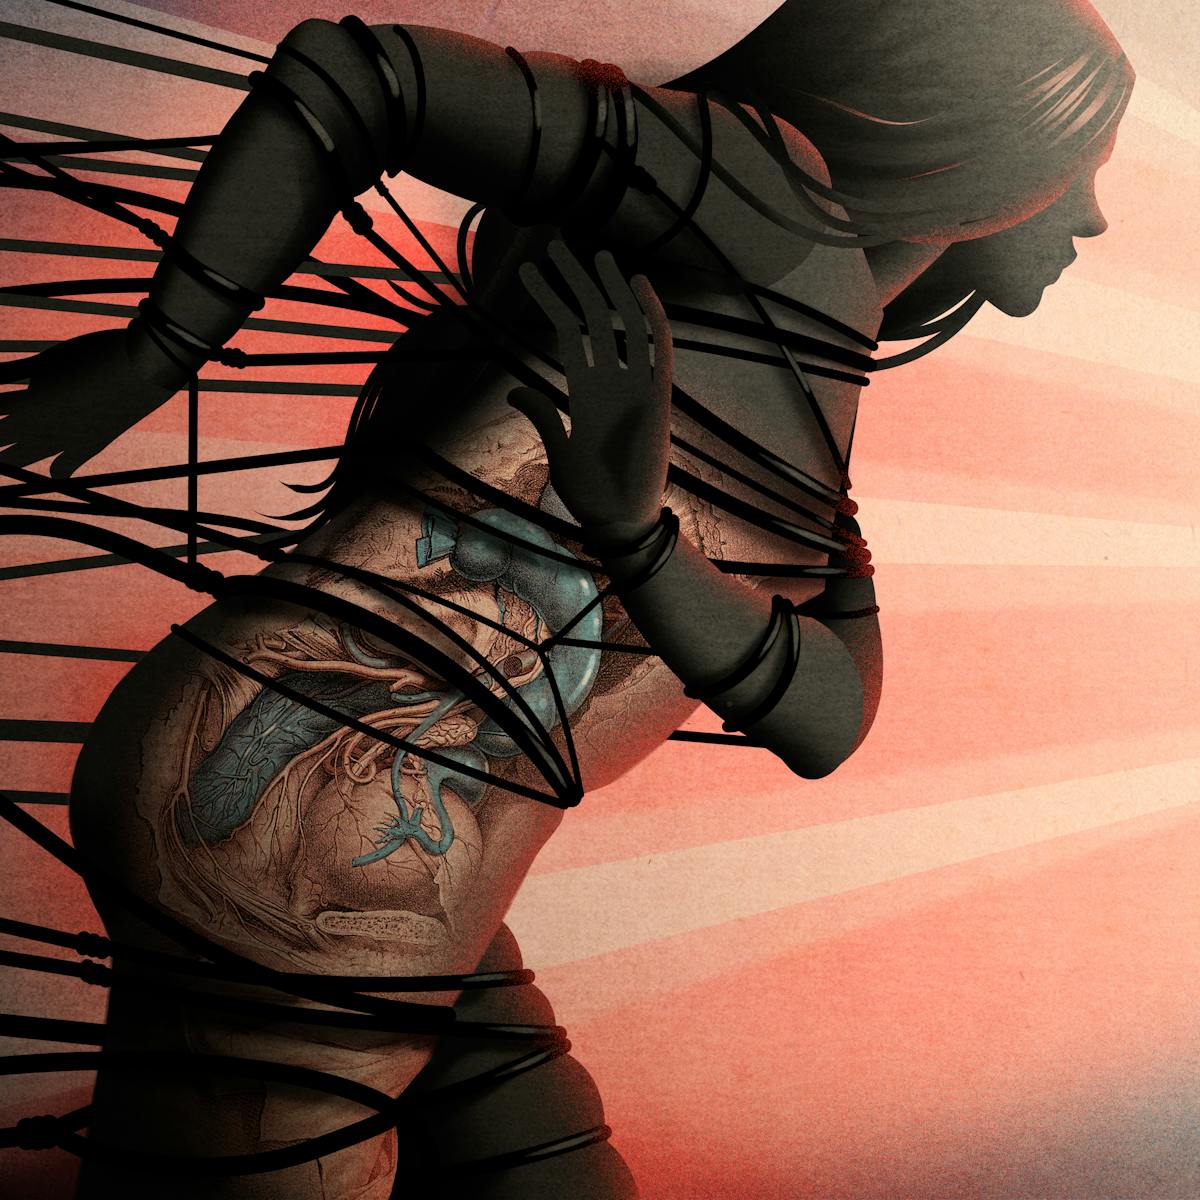 Illustration of a female figure in the process of running from the left of the image to the right. Her arms and body are being restrained by many ropes. Some of these ropes are breaking as she strains against them. Over her torso can be seen illustrations of her internal organs, some of which have turned blue as if frozen. The hues of the illustration are muted reds and blues.